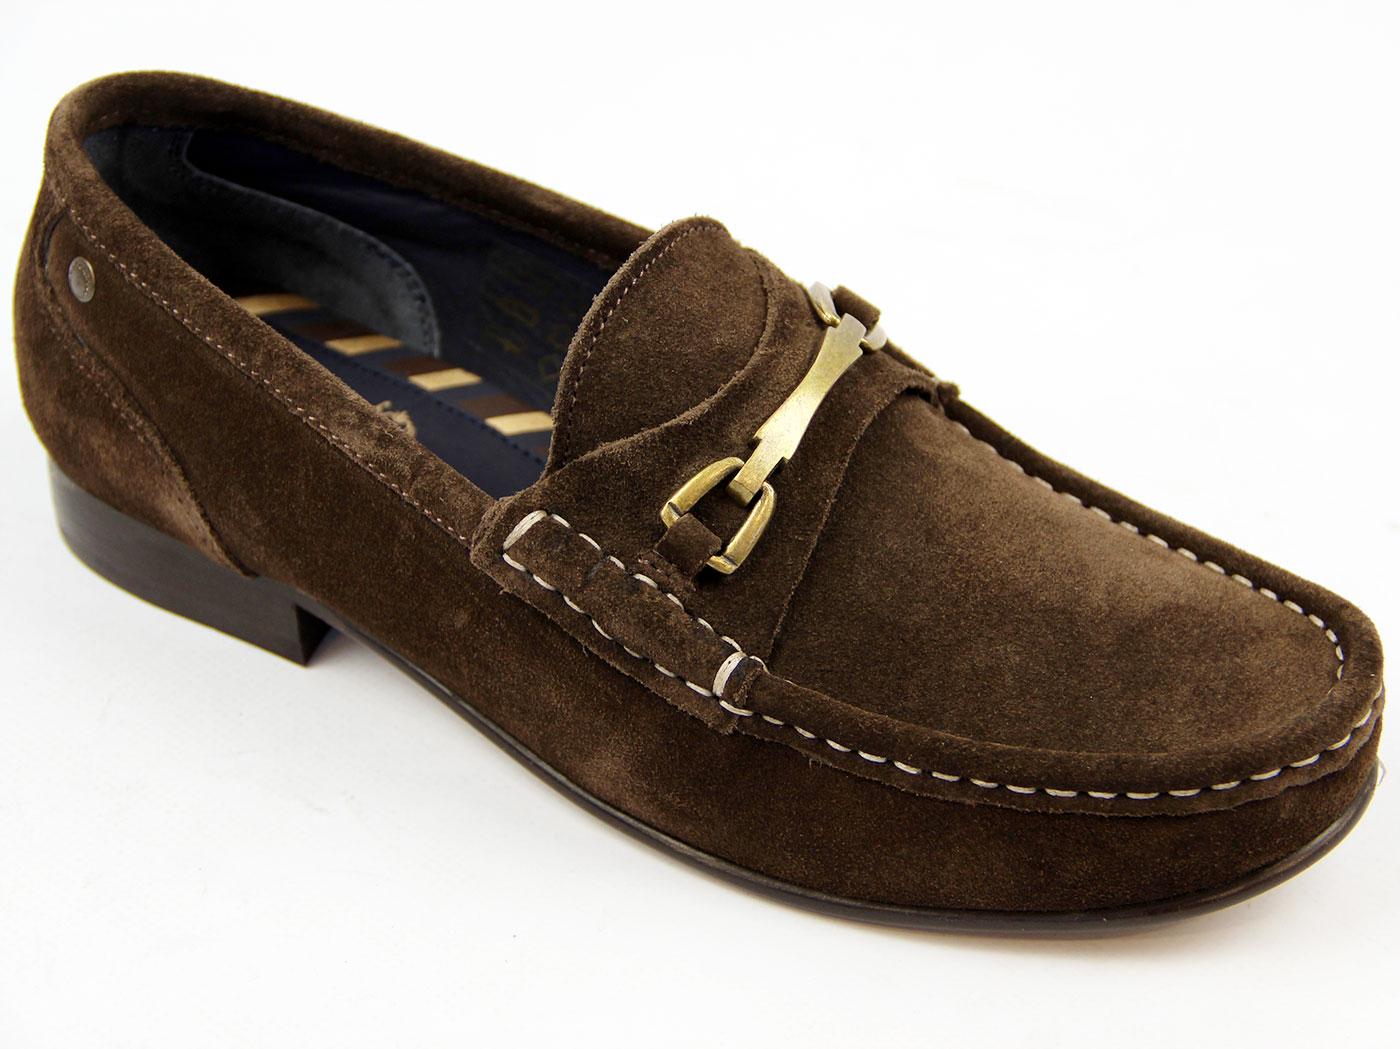 Journal BASE LONDON Retro Mod Suede Saddle Loafers